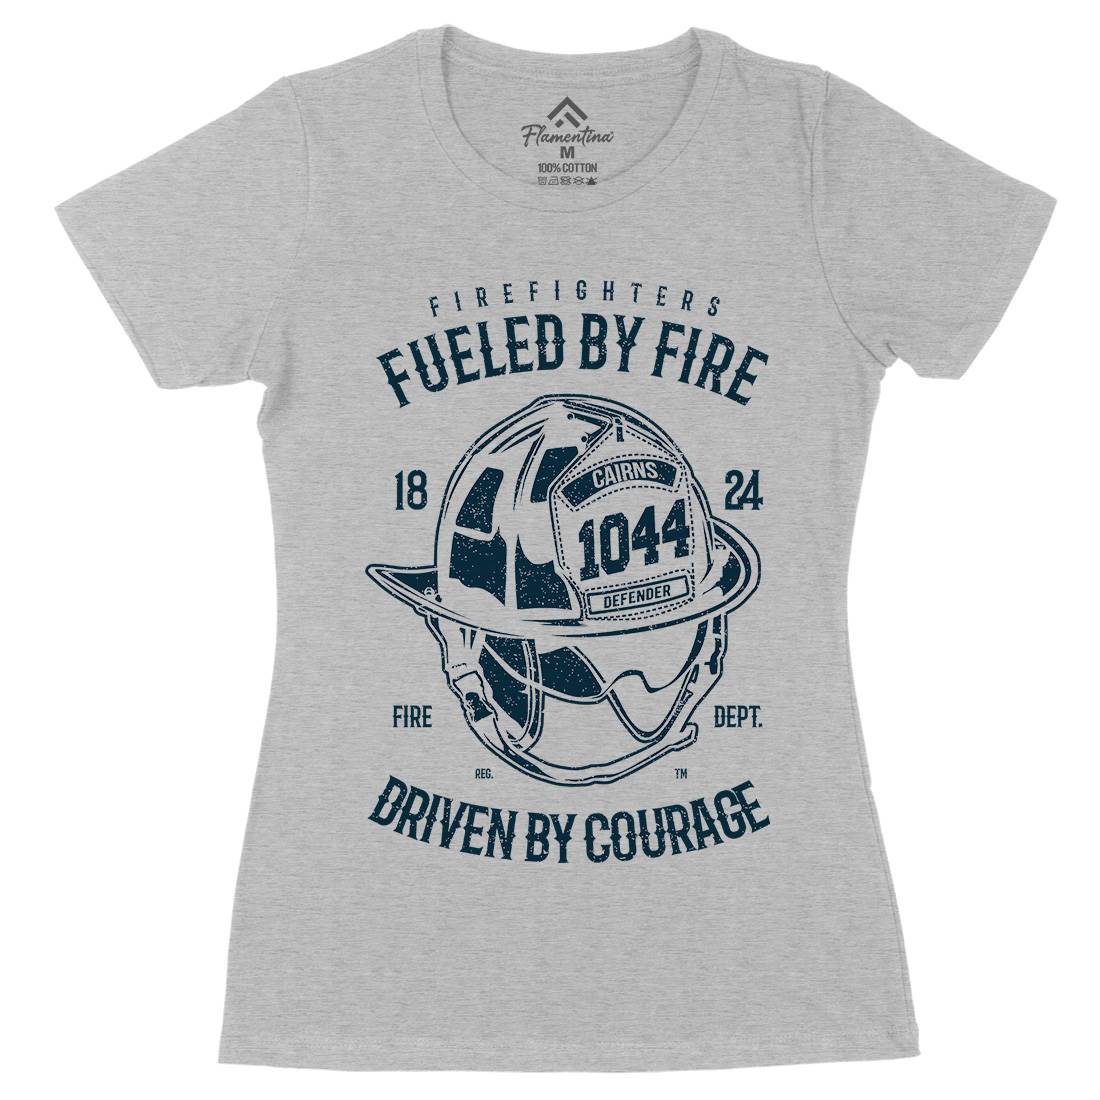 Fuelled By Fire Womens Organic Crew Neck T-Shirt Firefighters A667